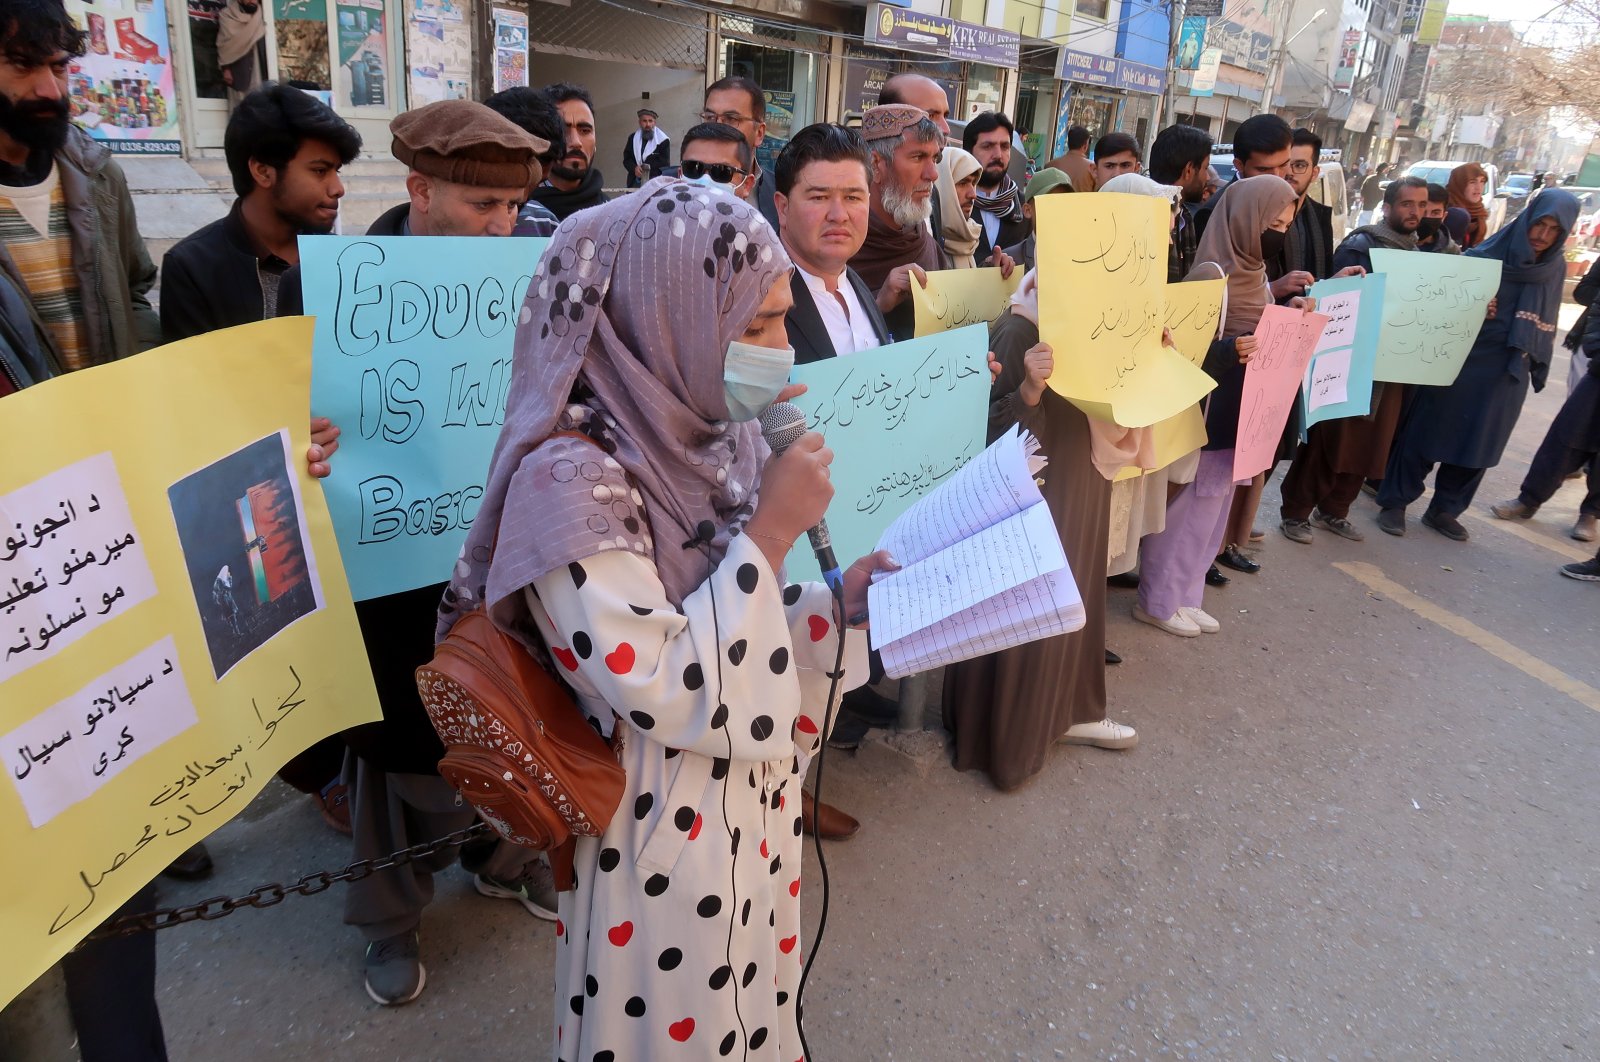 Afghan refugees in Pakistan hold placards during a protest as they demand the Taliban government to allow education for girls, in Quetta, the provincial capital of Balochistan province, Pakistan, Dec. 24, 2022. (EPA Photo)